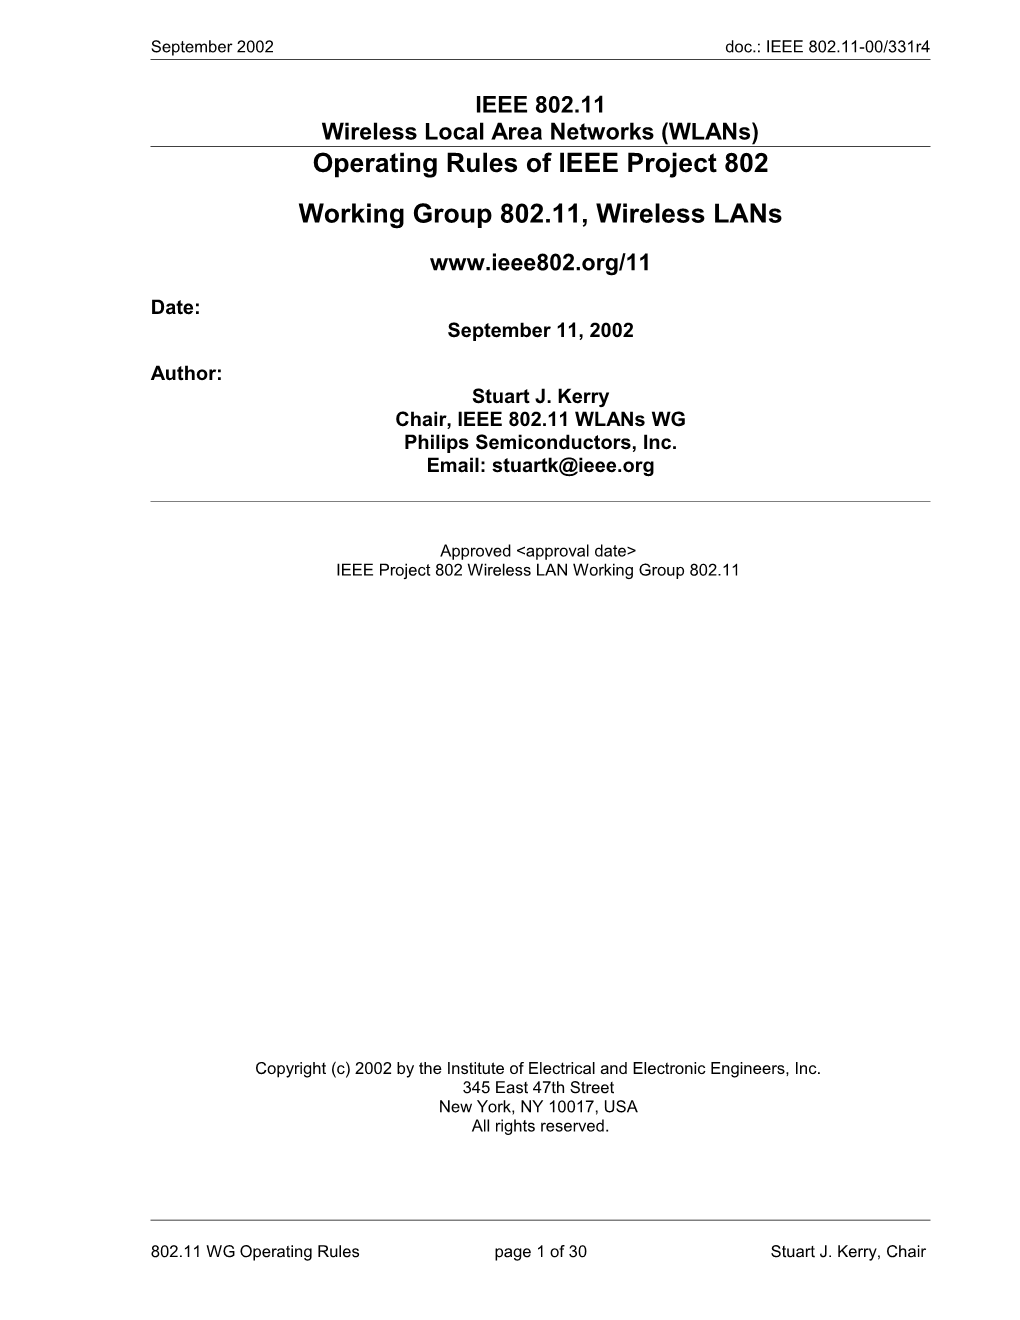 Operating Rules of IEEE Project 802